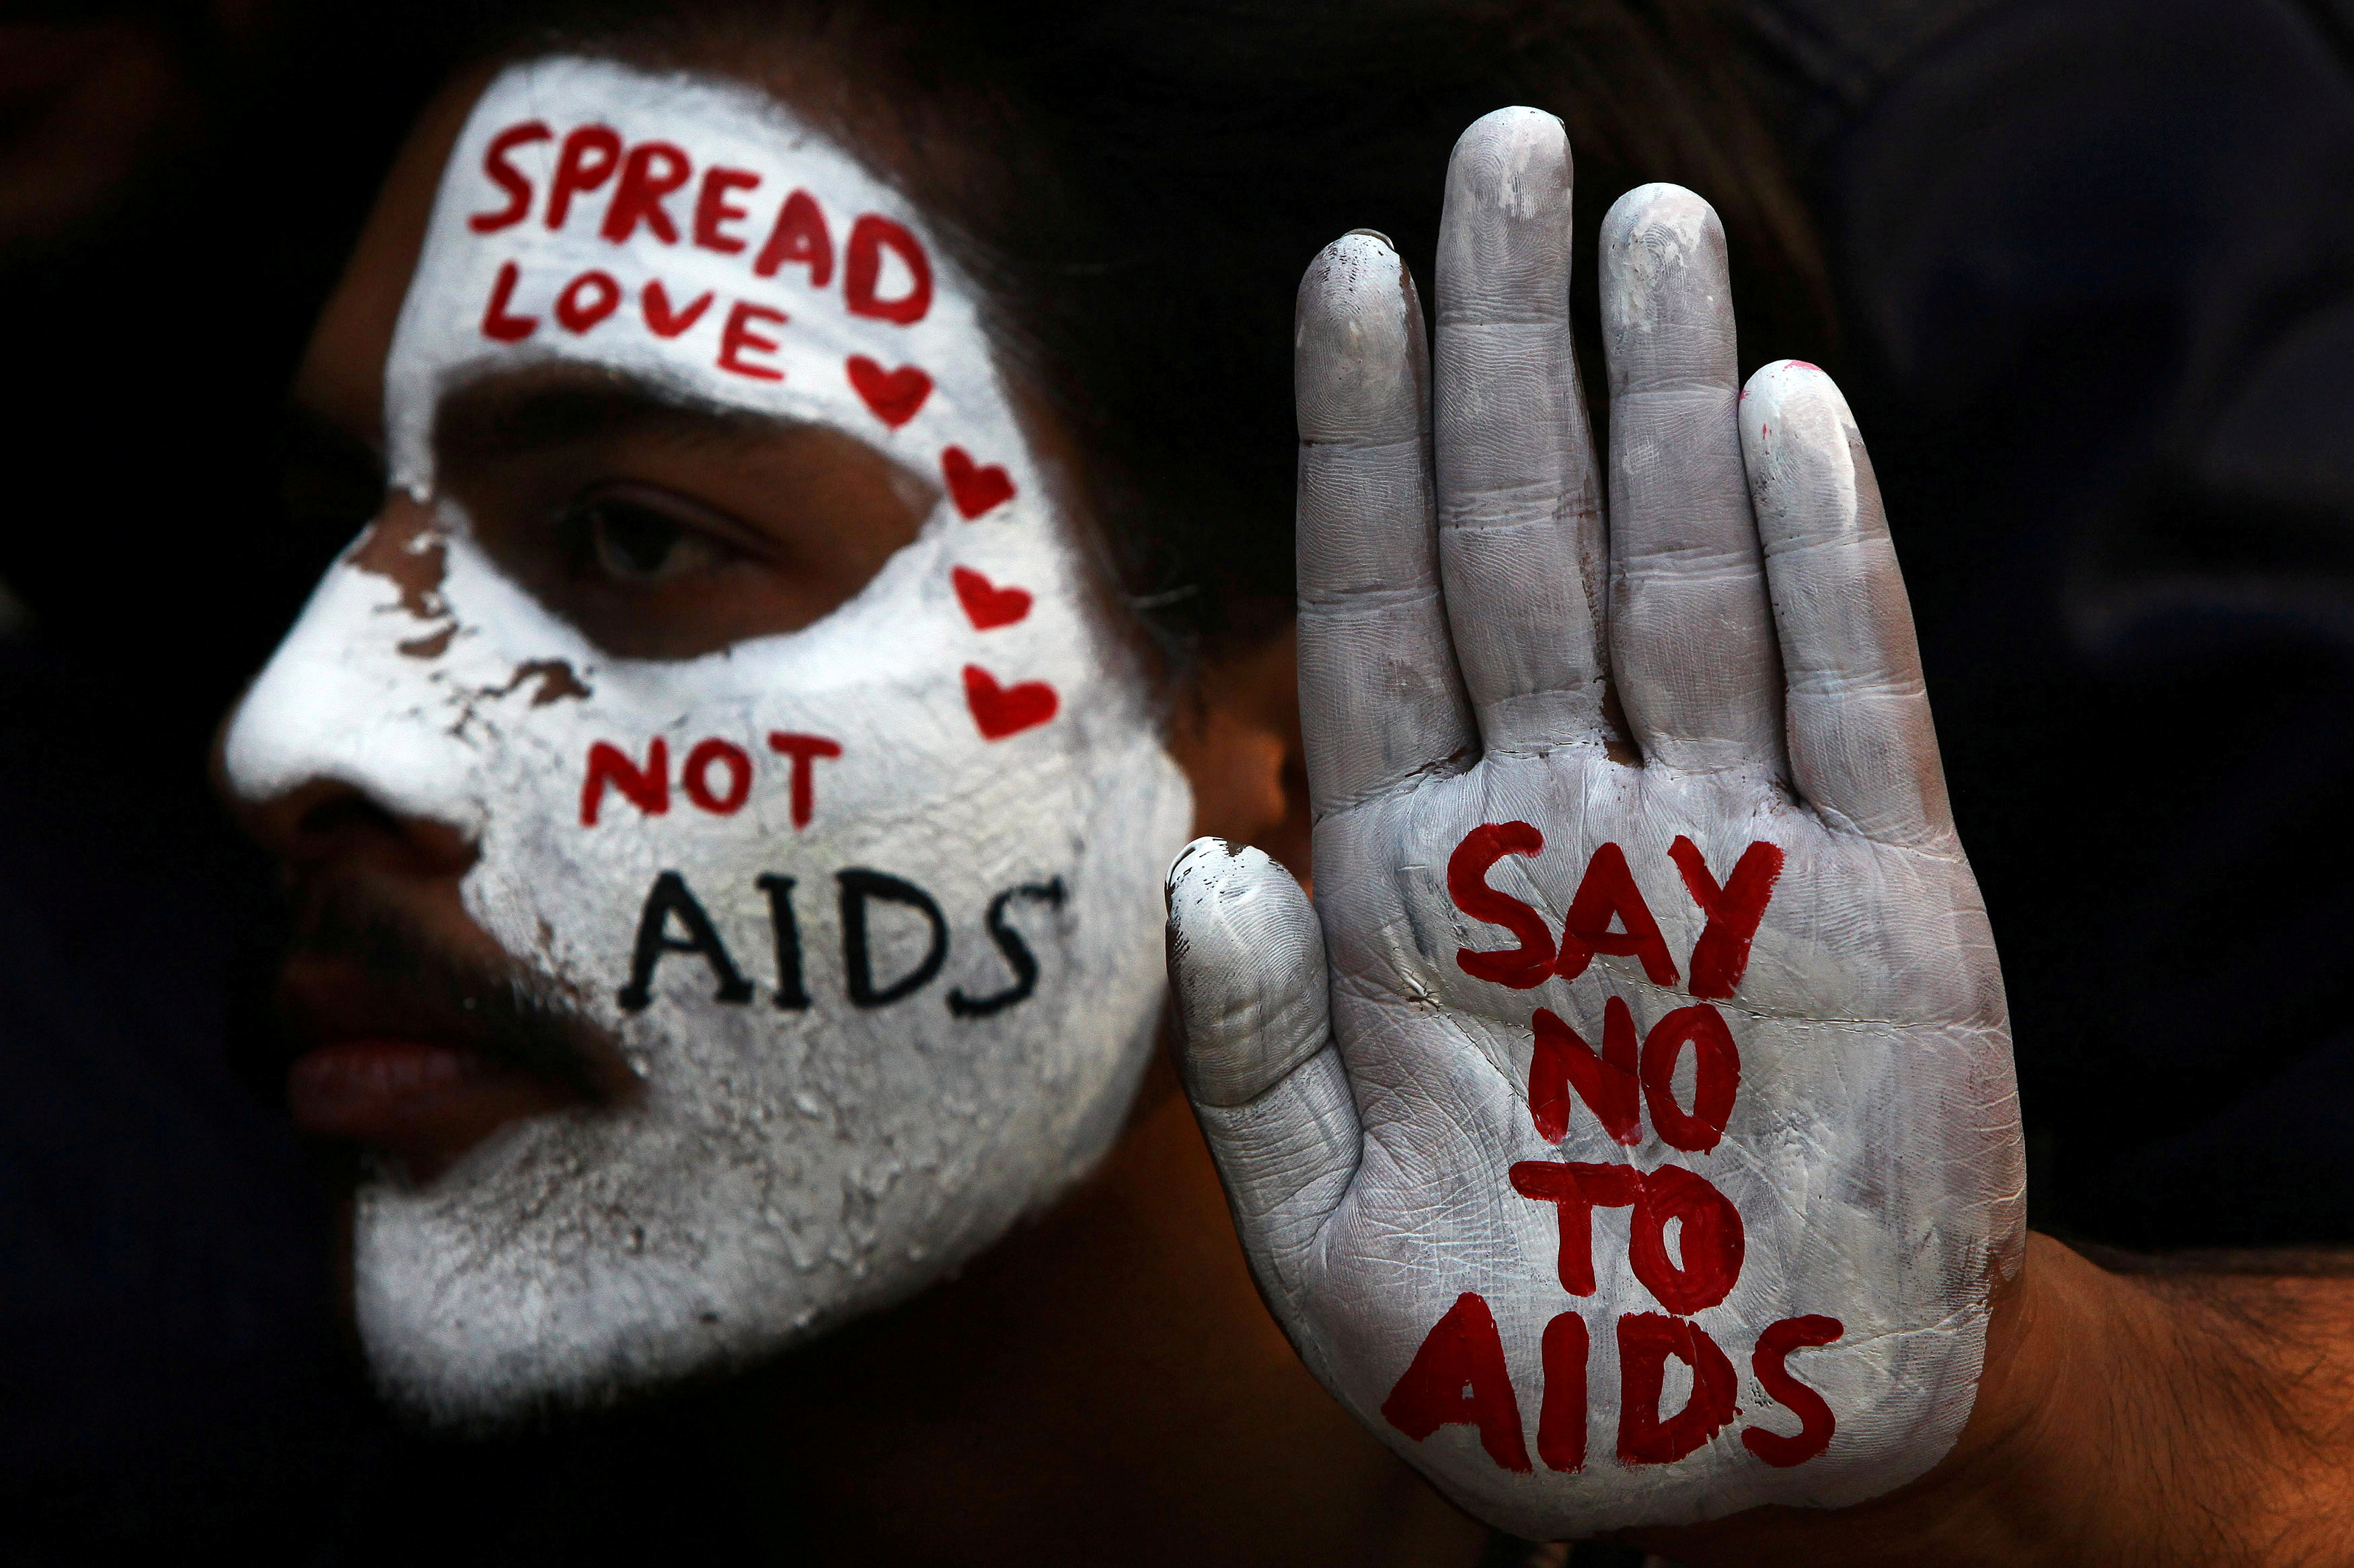 Kenya Bishops Reject Condoms in Fight Against HIV/AIDS - The